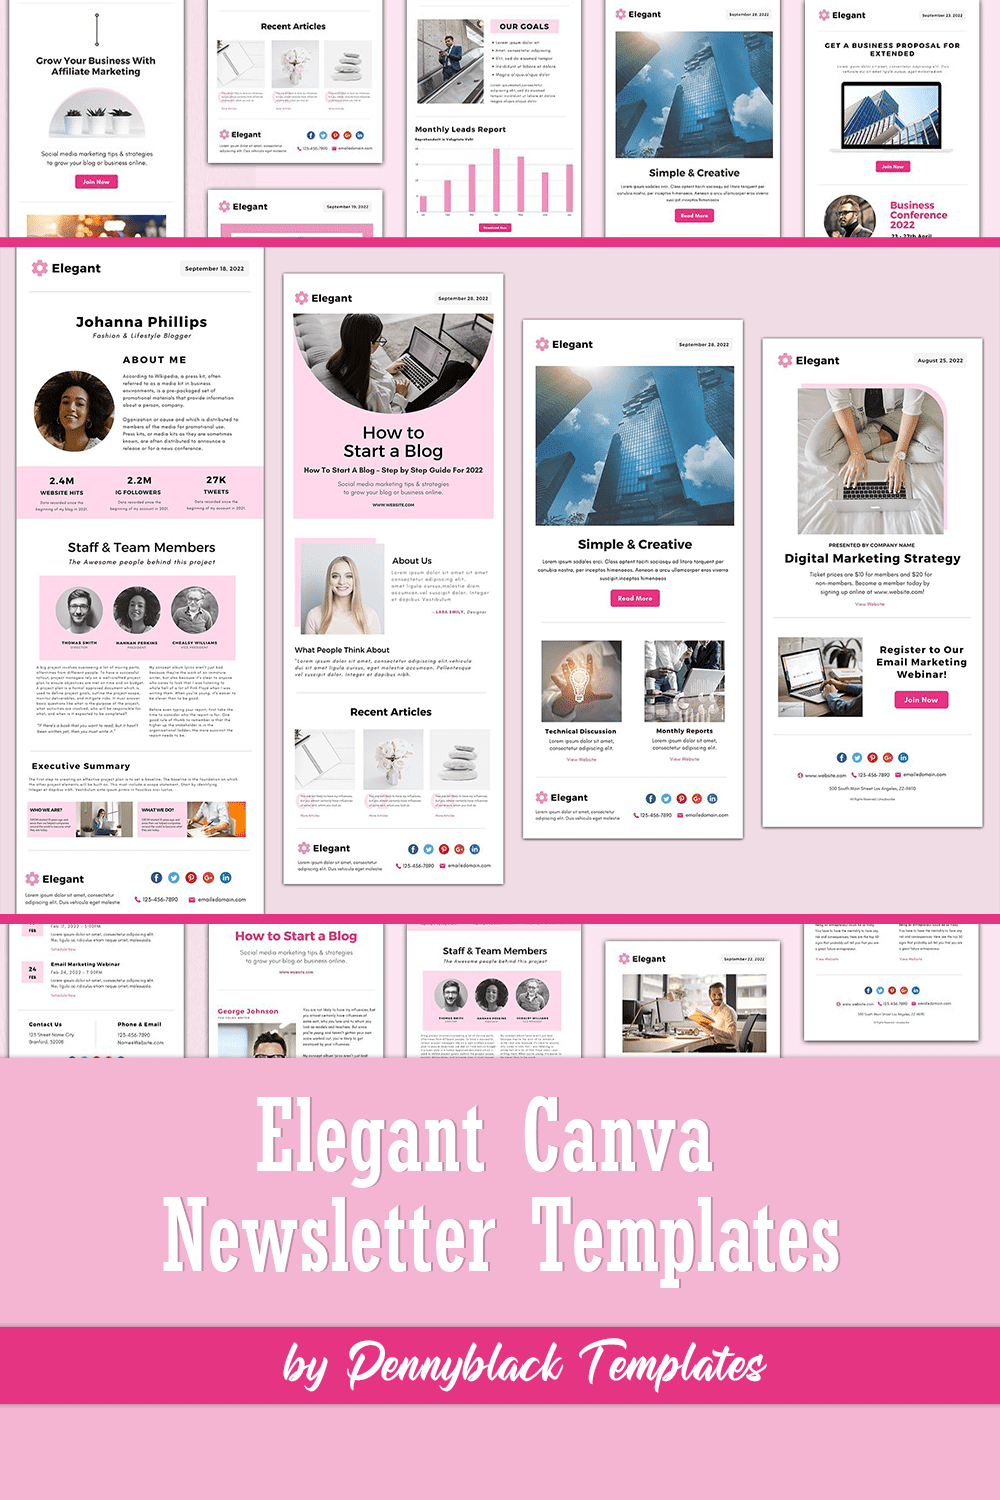 Collection of images of beautiful newsletter templates.